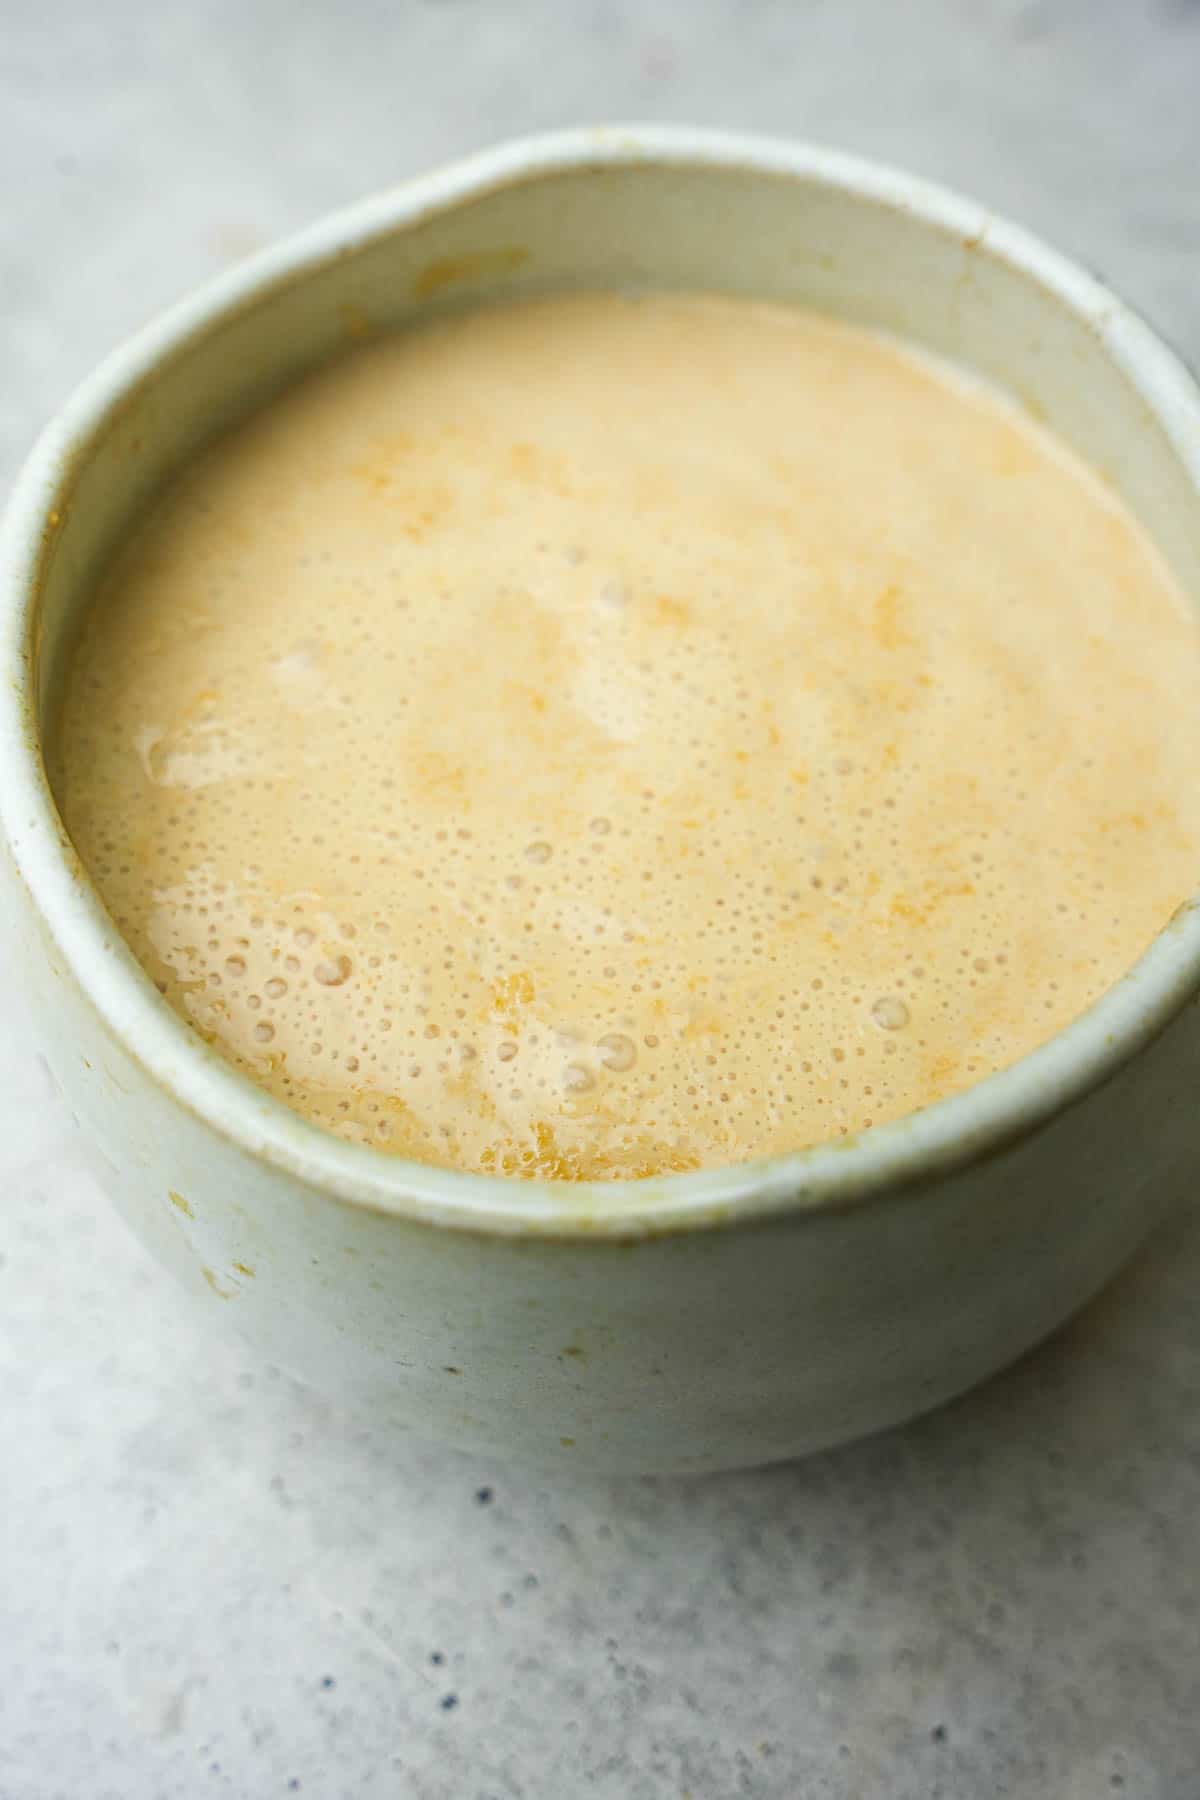 A bowl of yeast, proofing on warmed plant-based milk on a table.